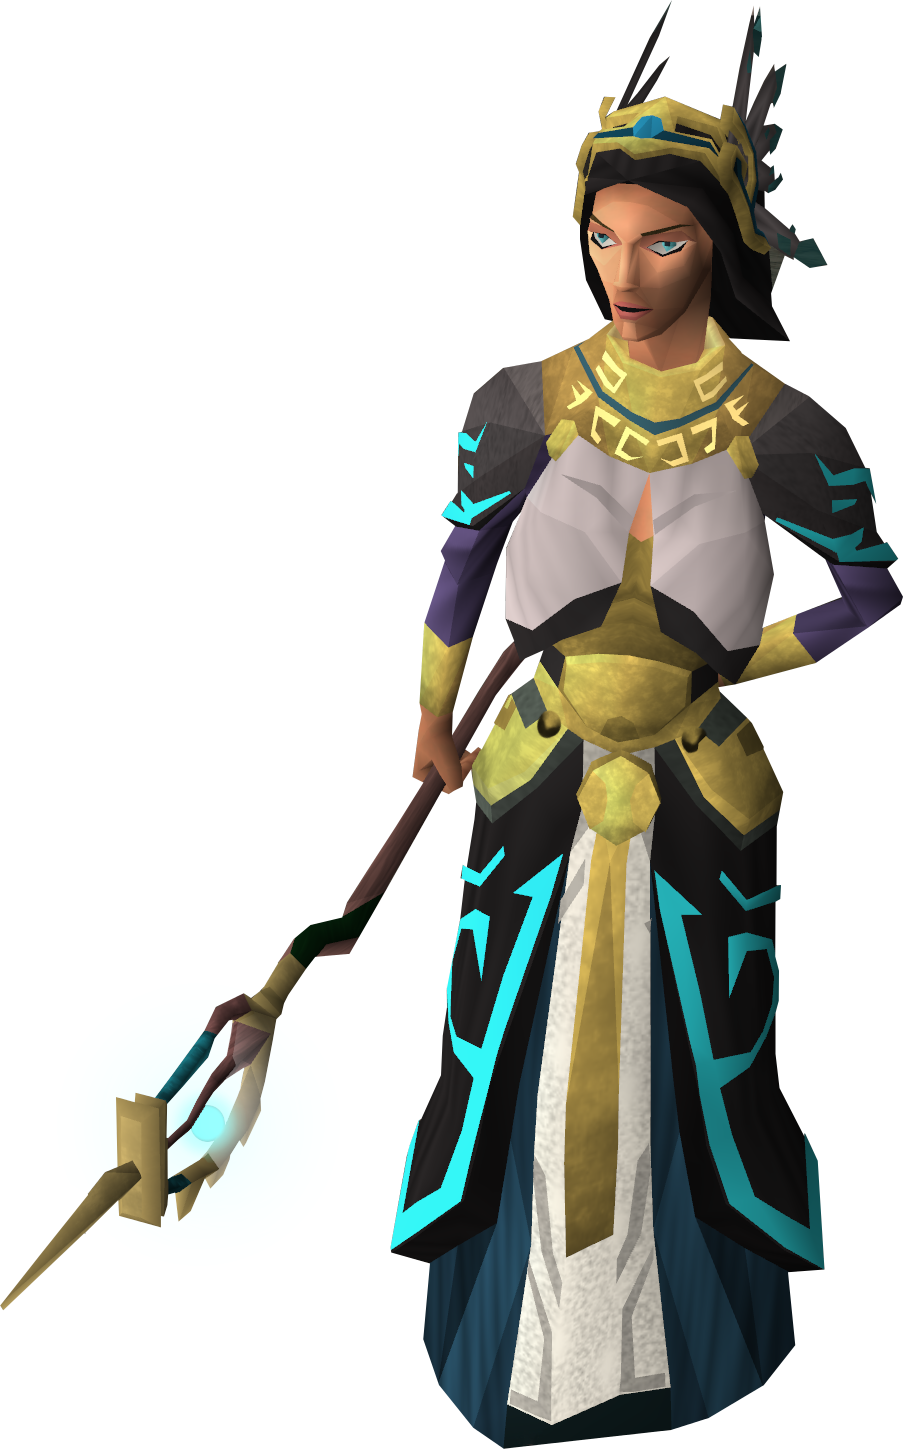 Upcoming updates - The RuneScape Wiki